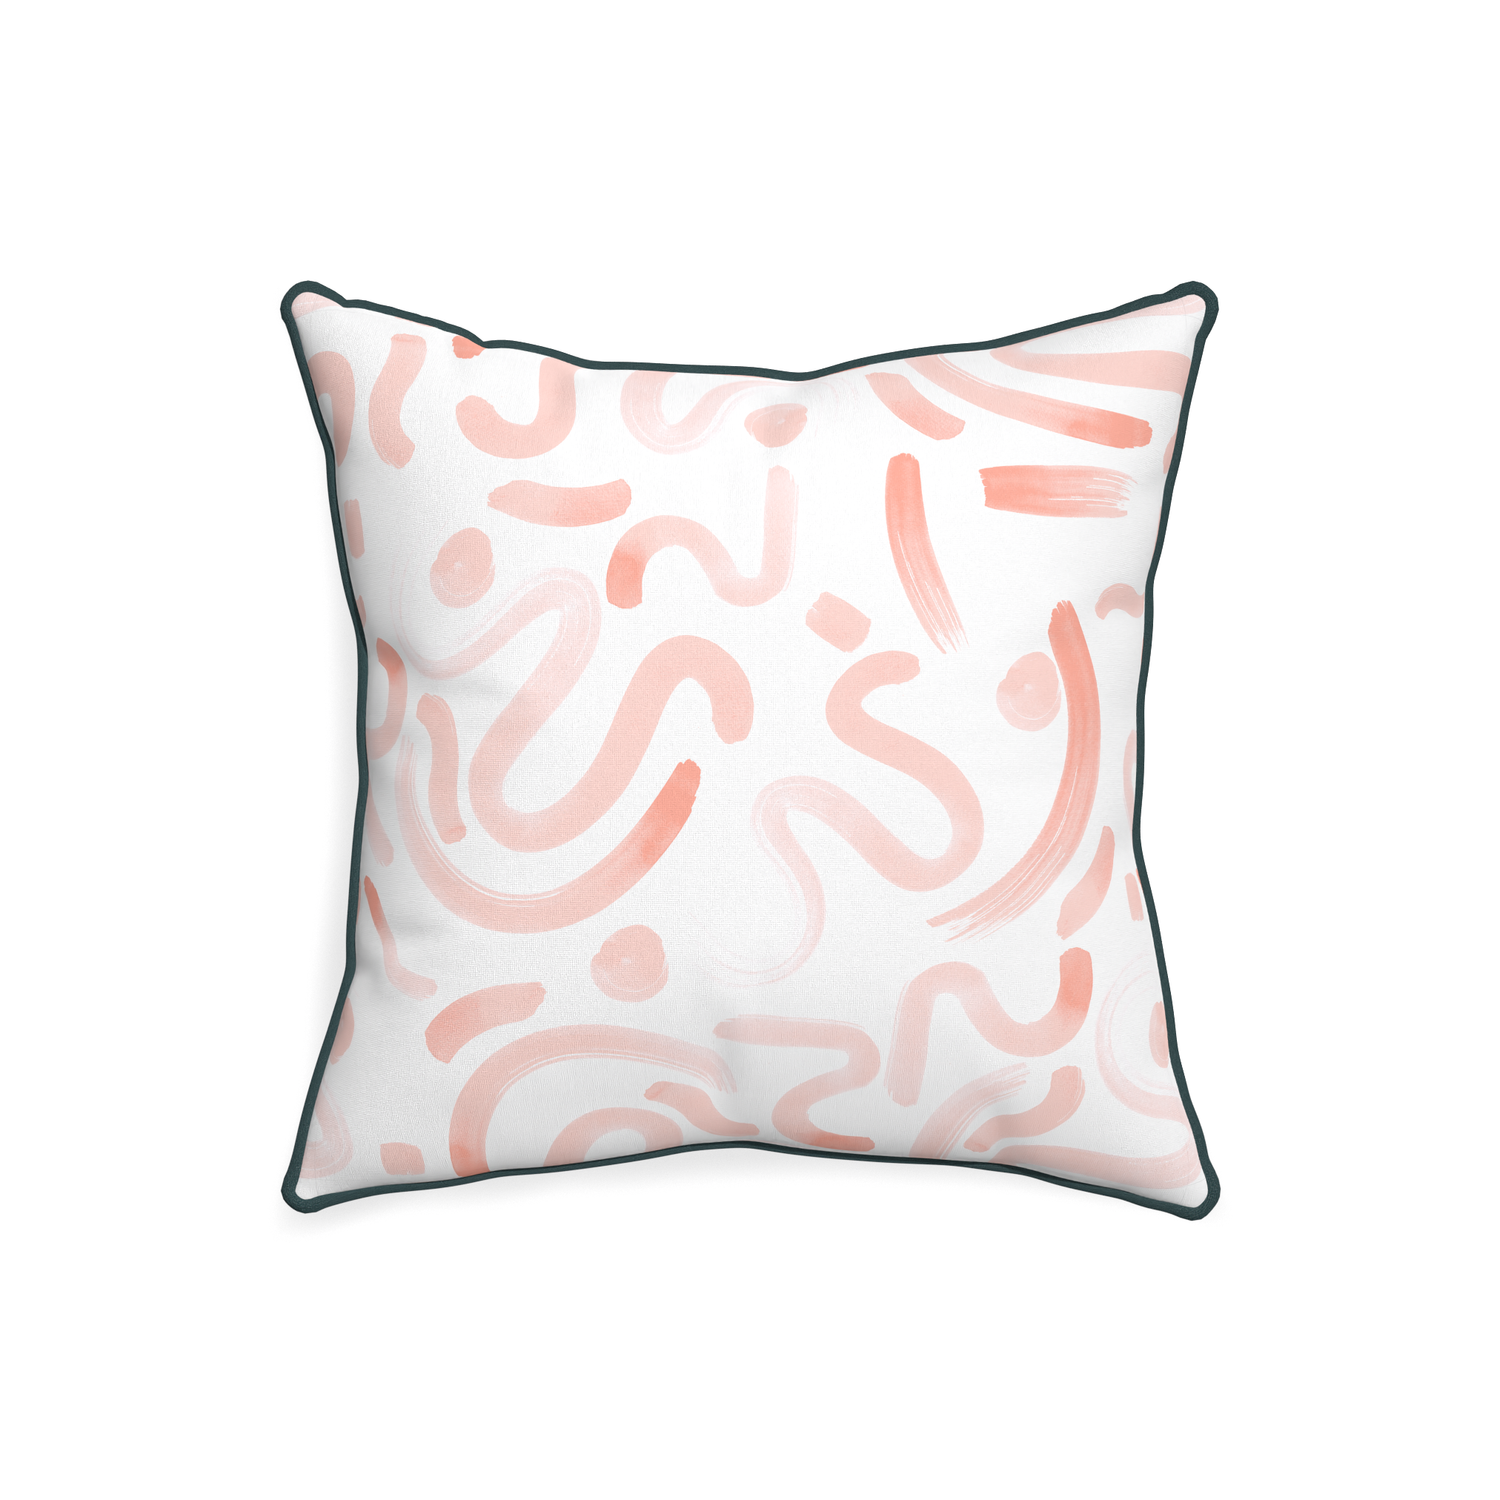 20-square hockney pink custom pink graphicpillow with p piping on white background